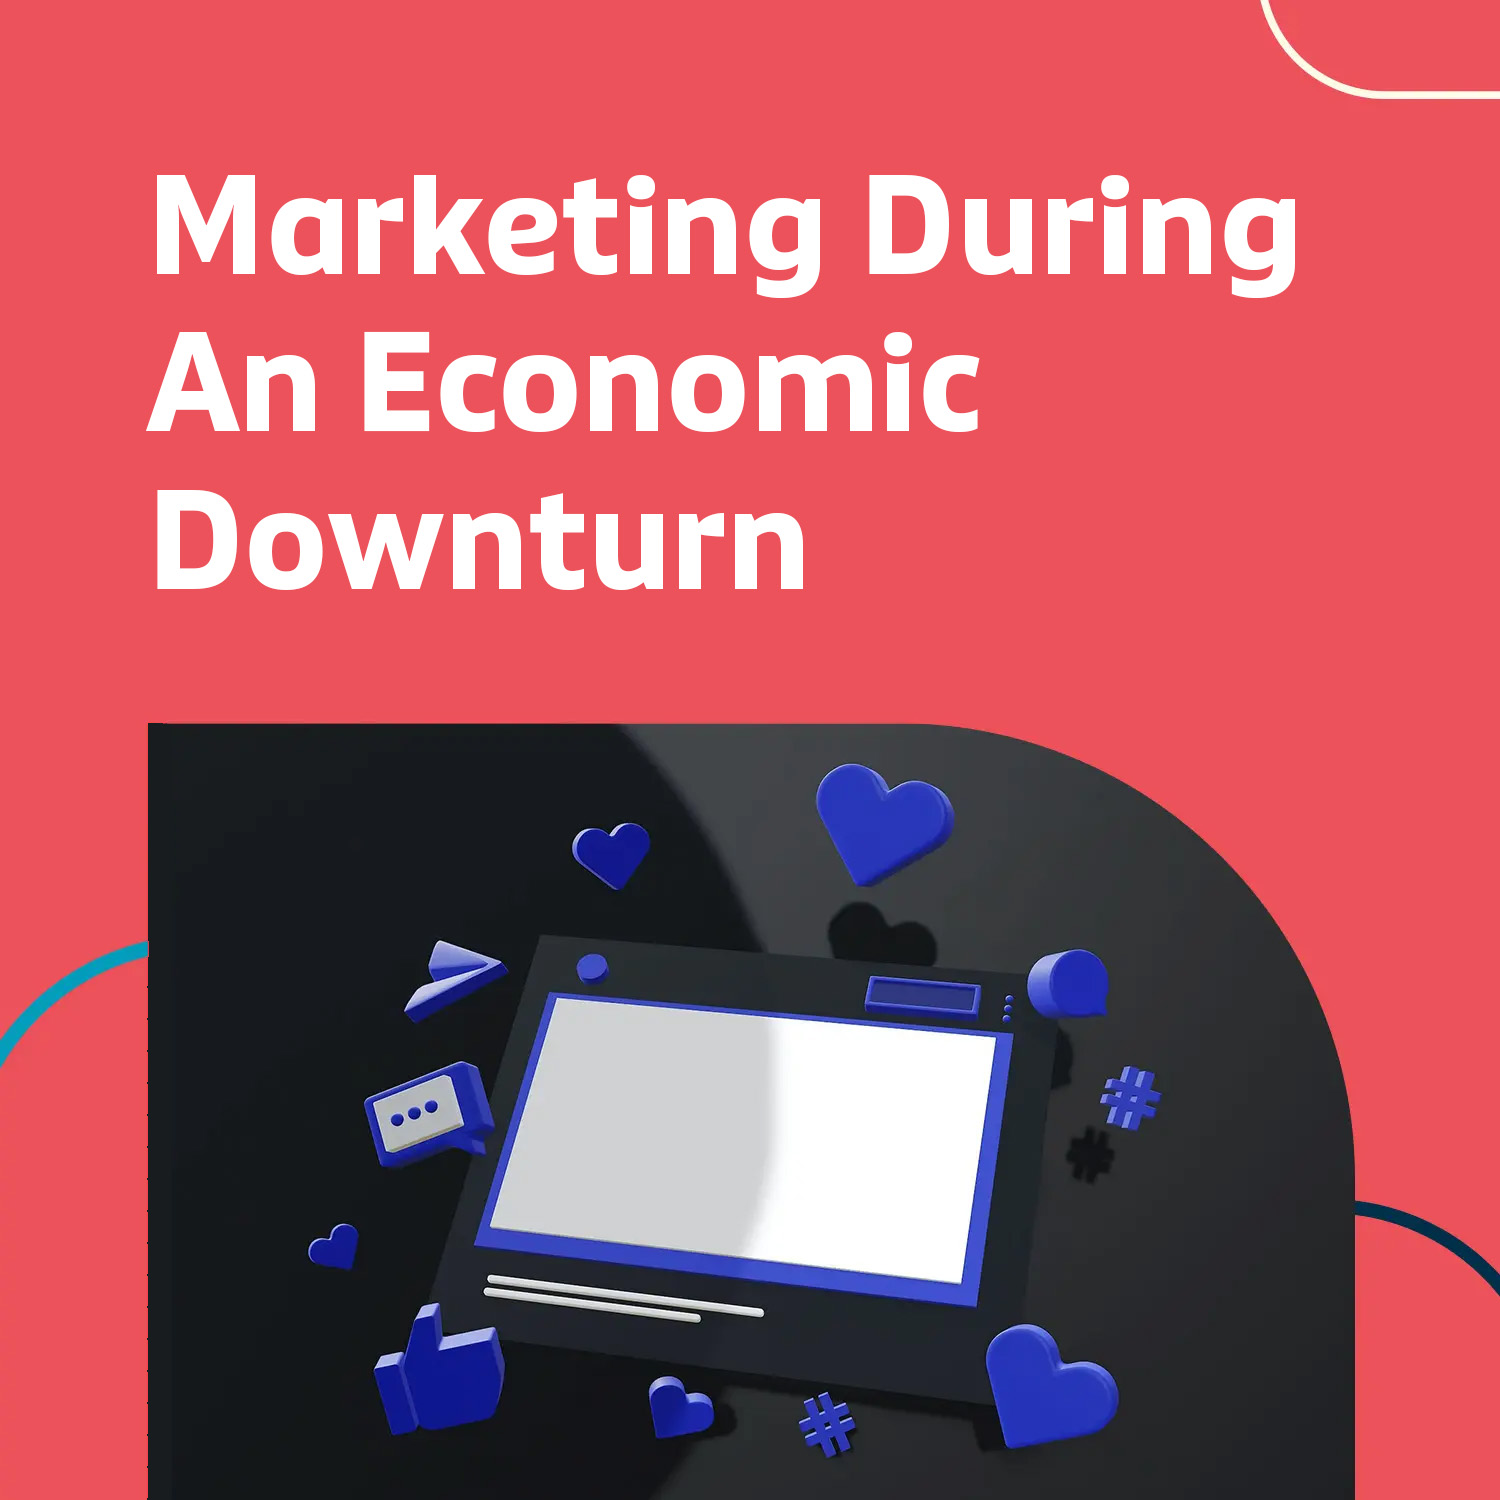 How can Marketing Improve Profitability During an Economic Downturn